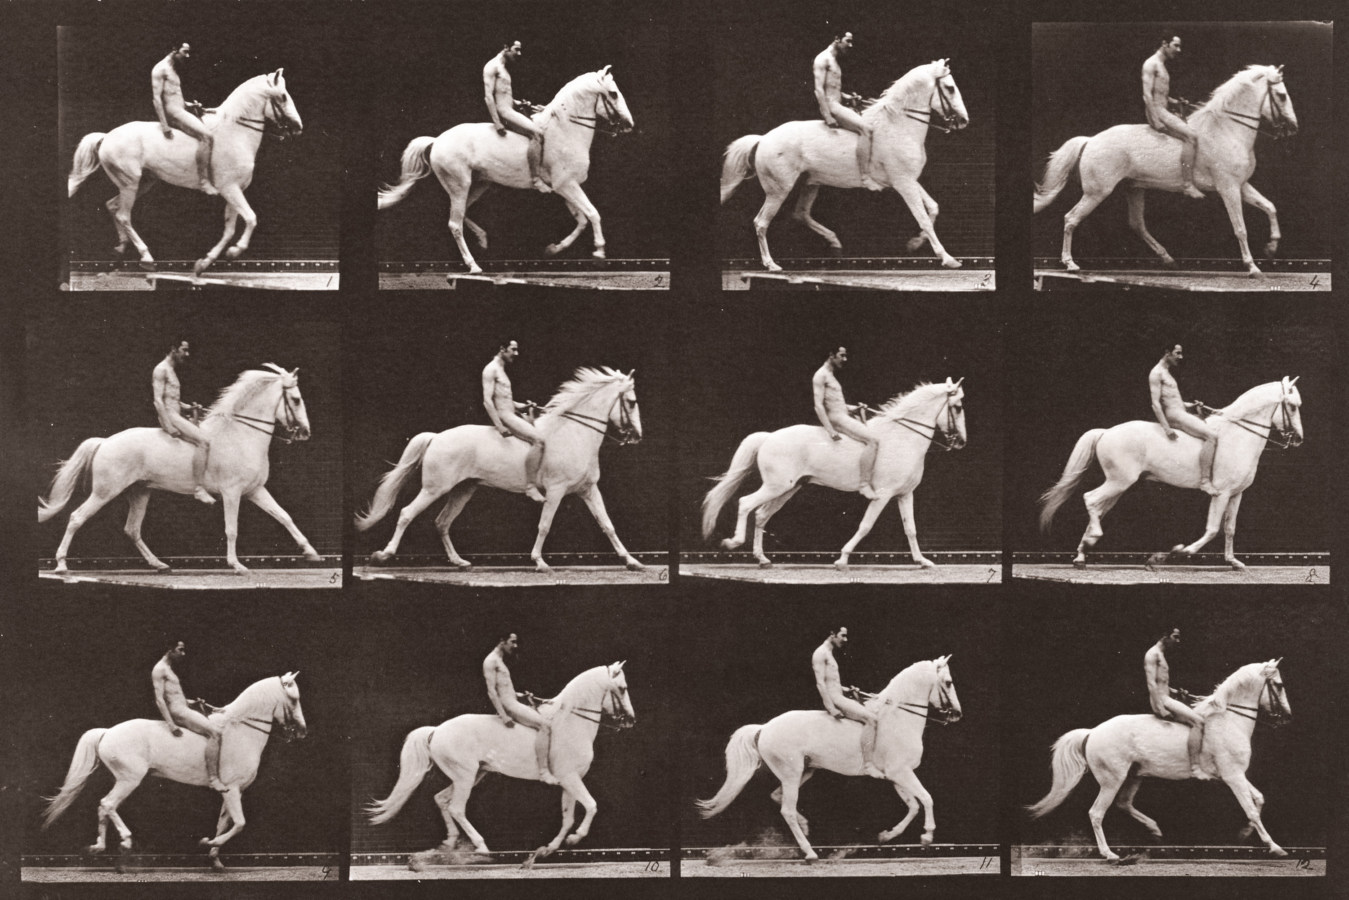 Sepia toned photograph with a grid of 12 panels showing a nude man riding a horse.